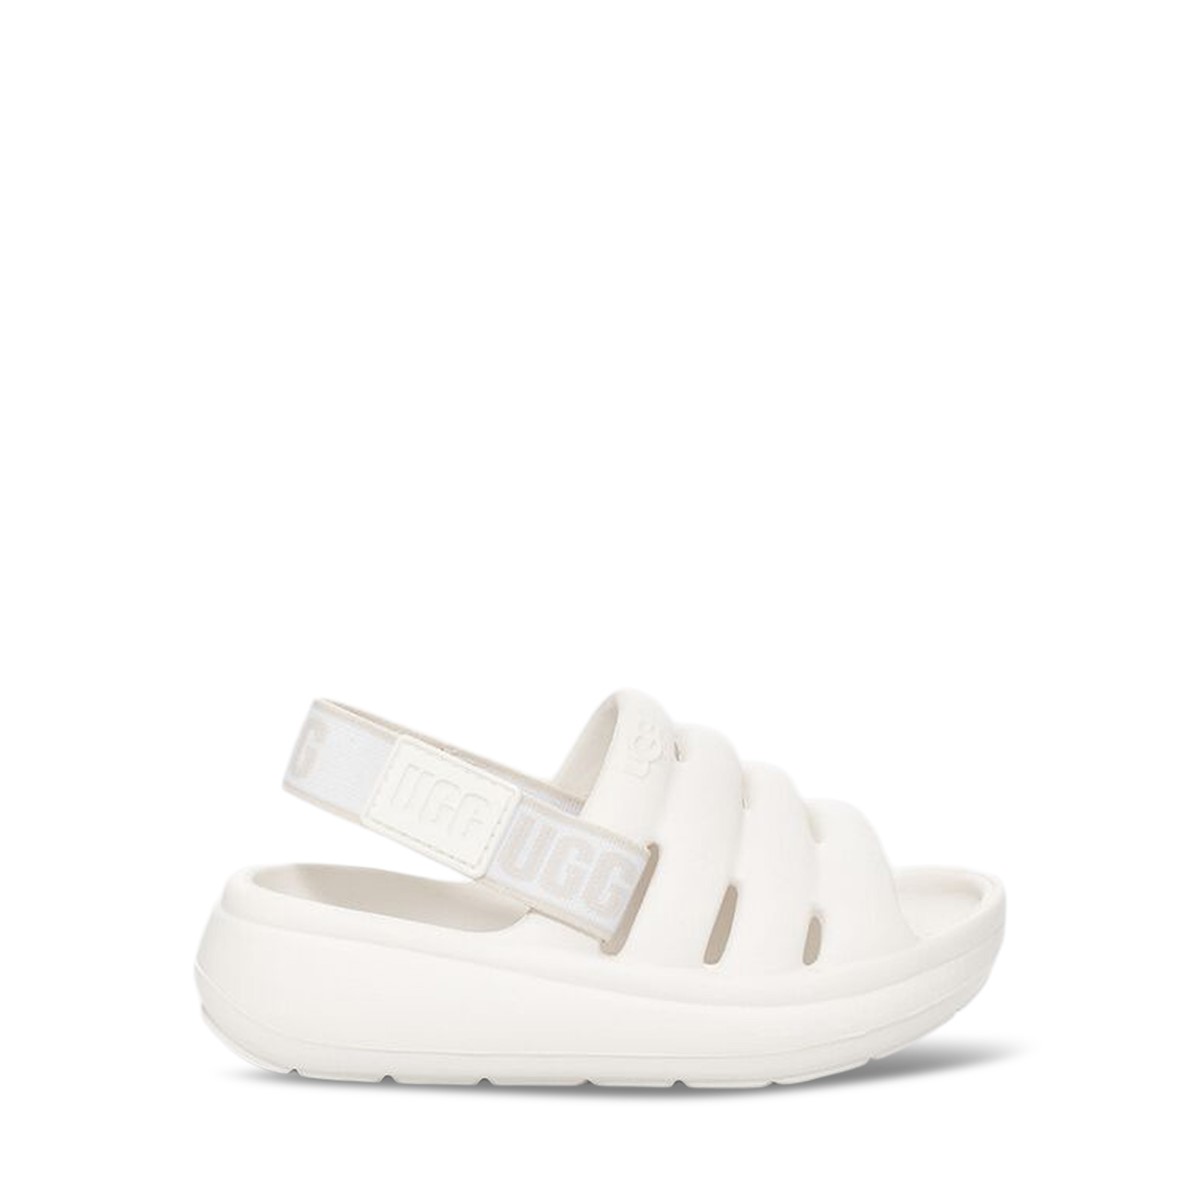 Toddler's Sport Yeah Sandals in White